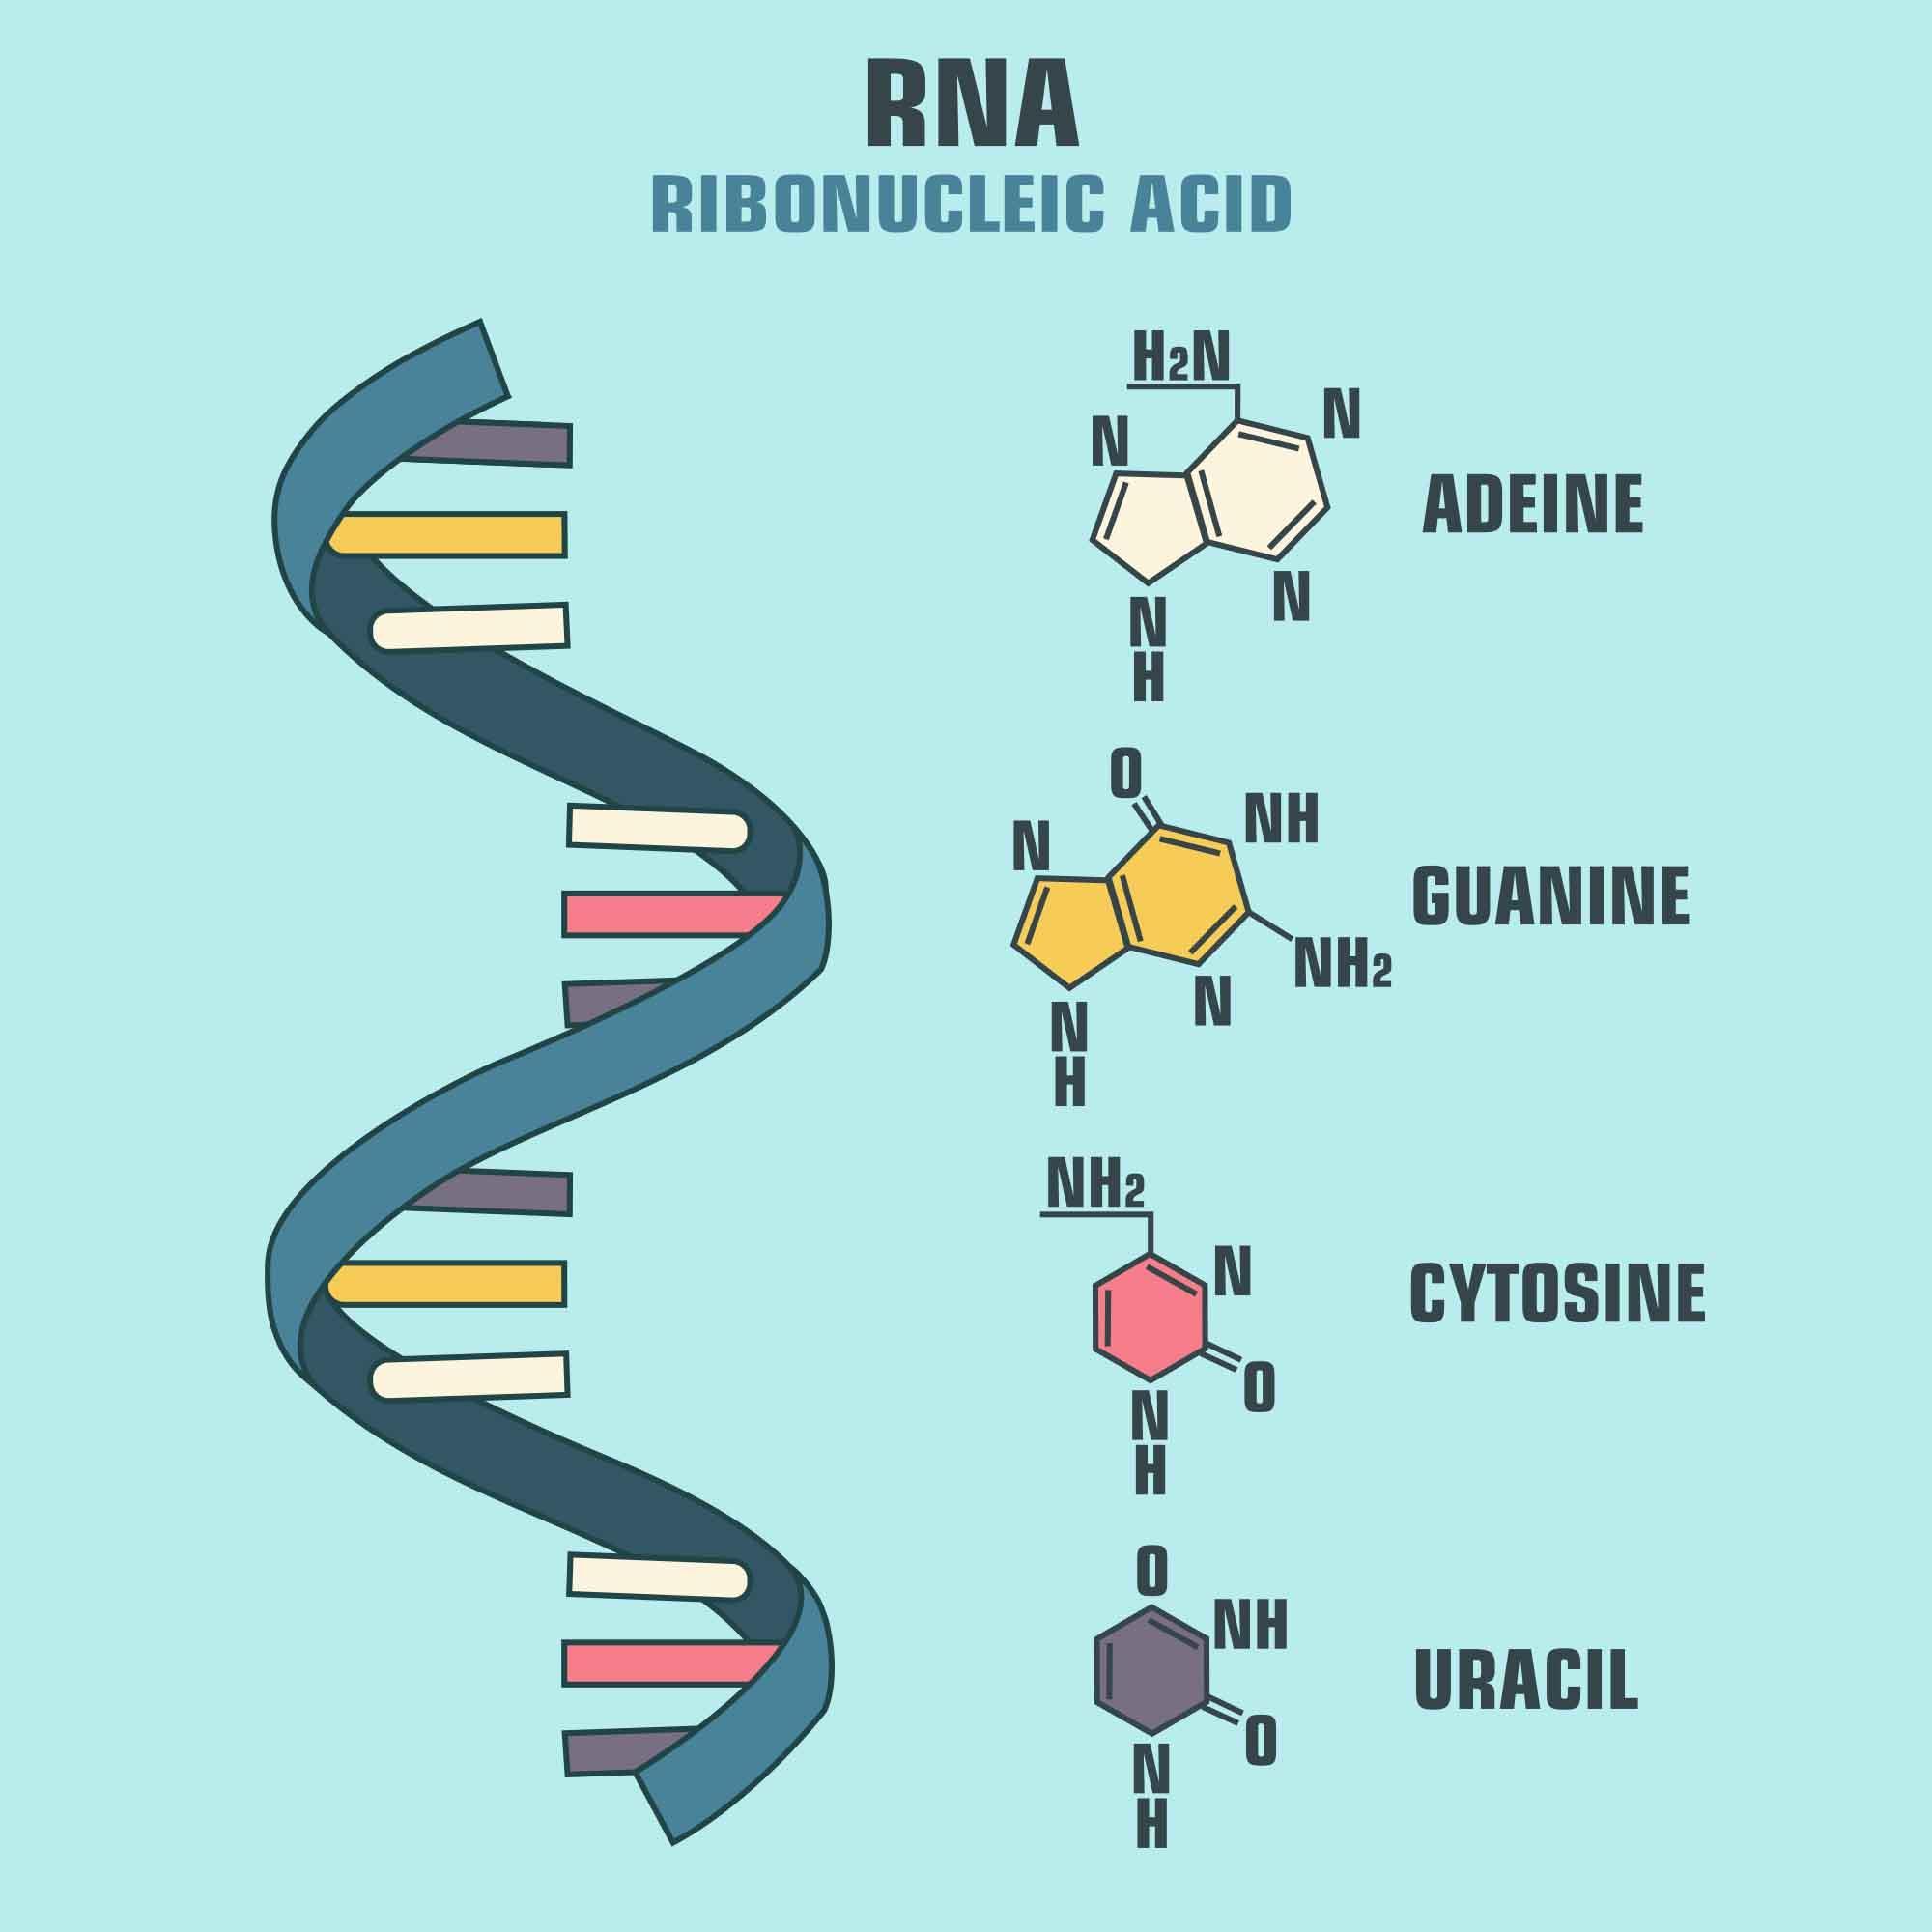 What Is Rna Made Of